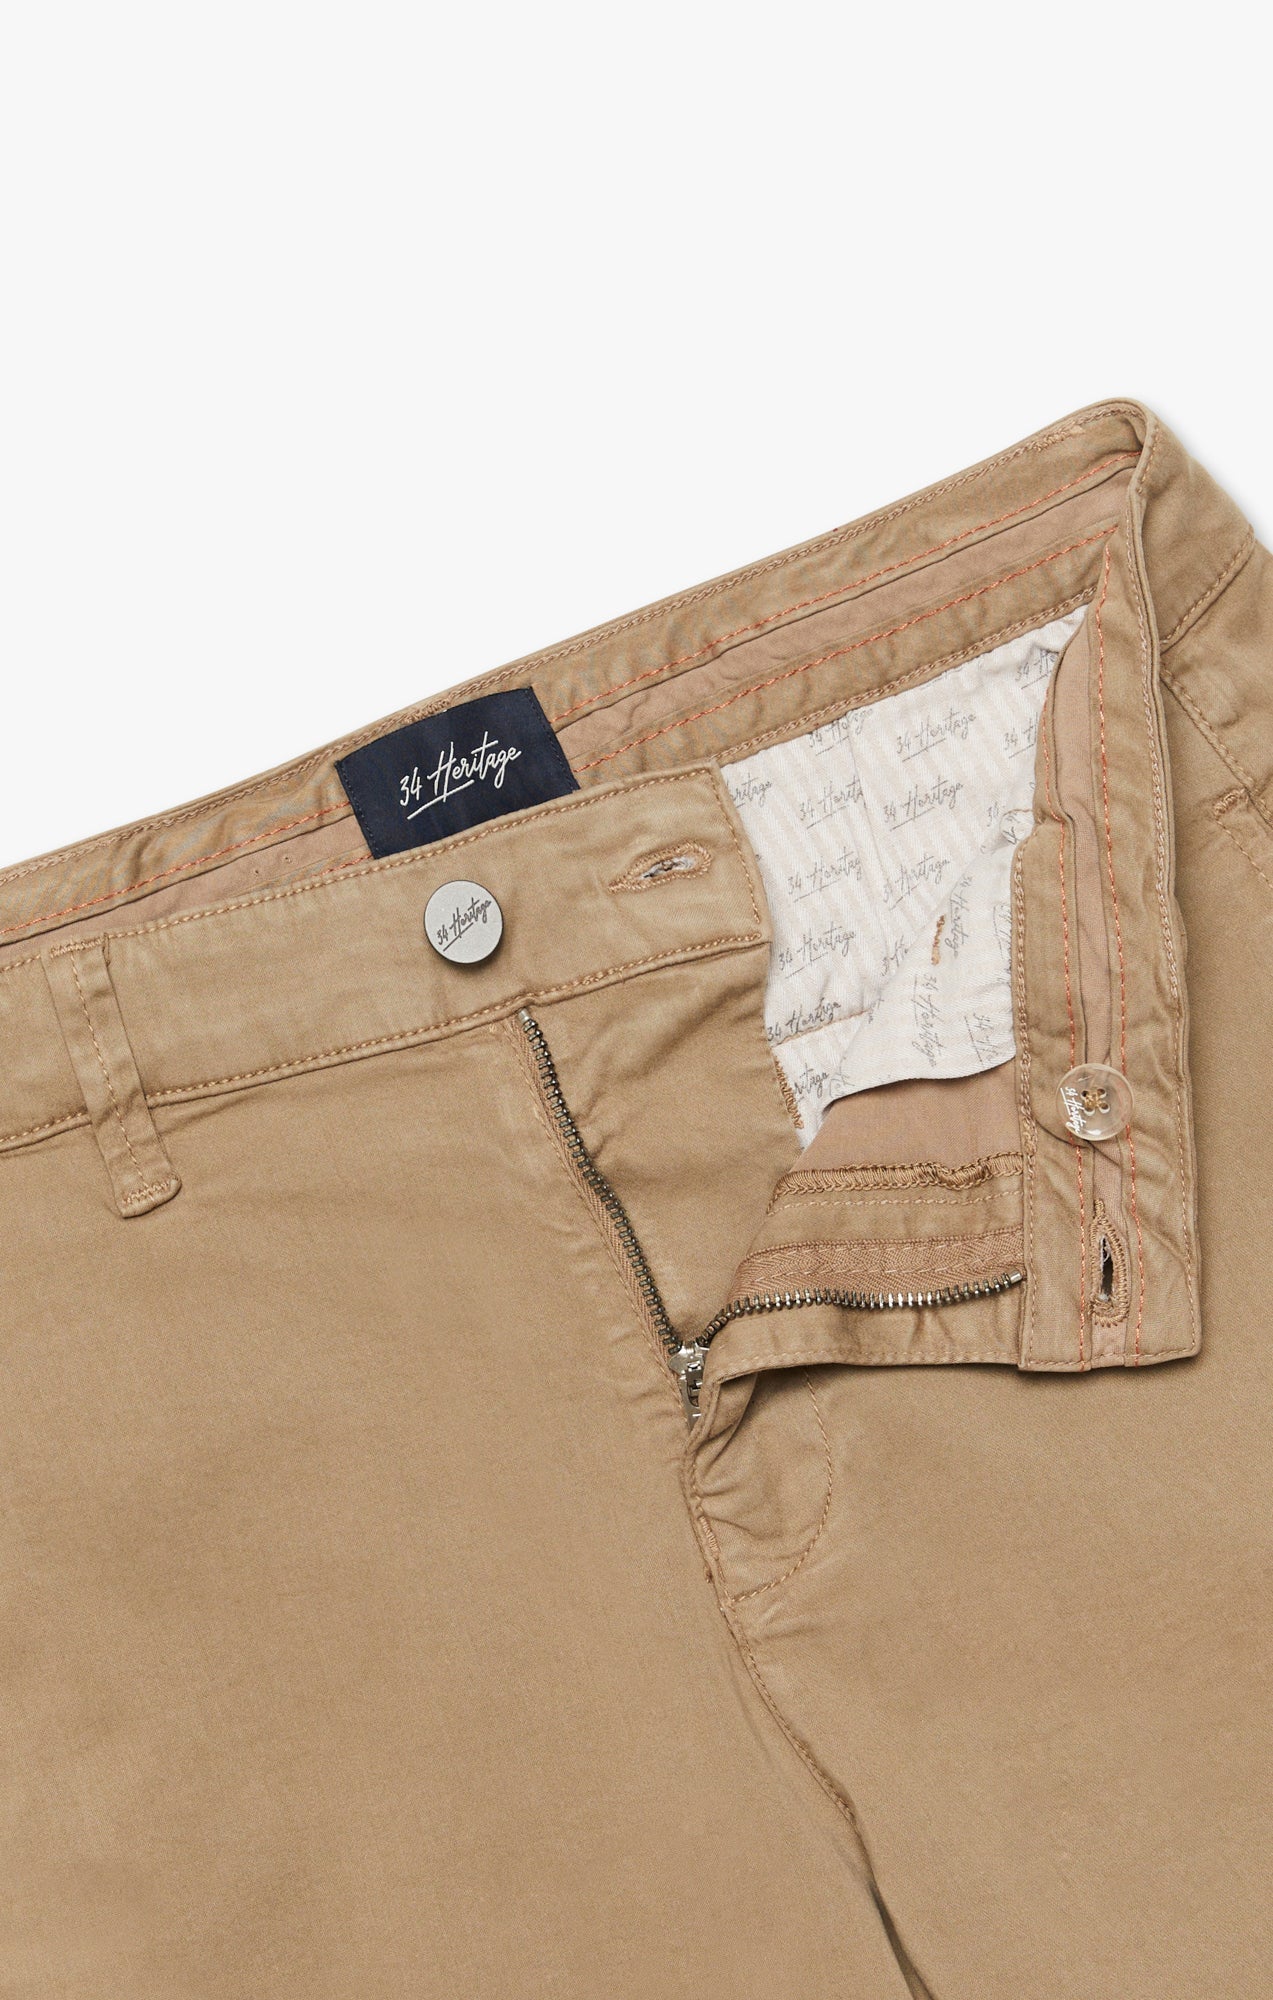 34 Heritage Nevada Shorts in Roasted Cahew Twill